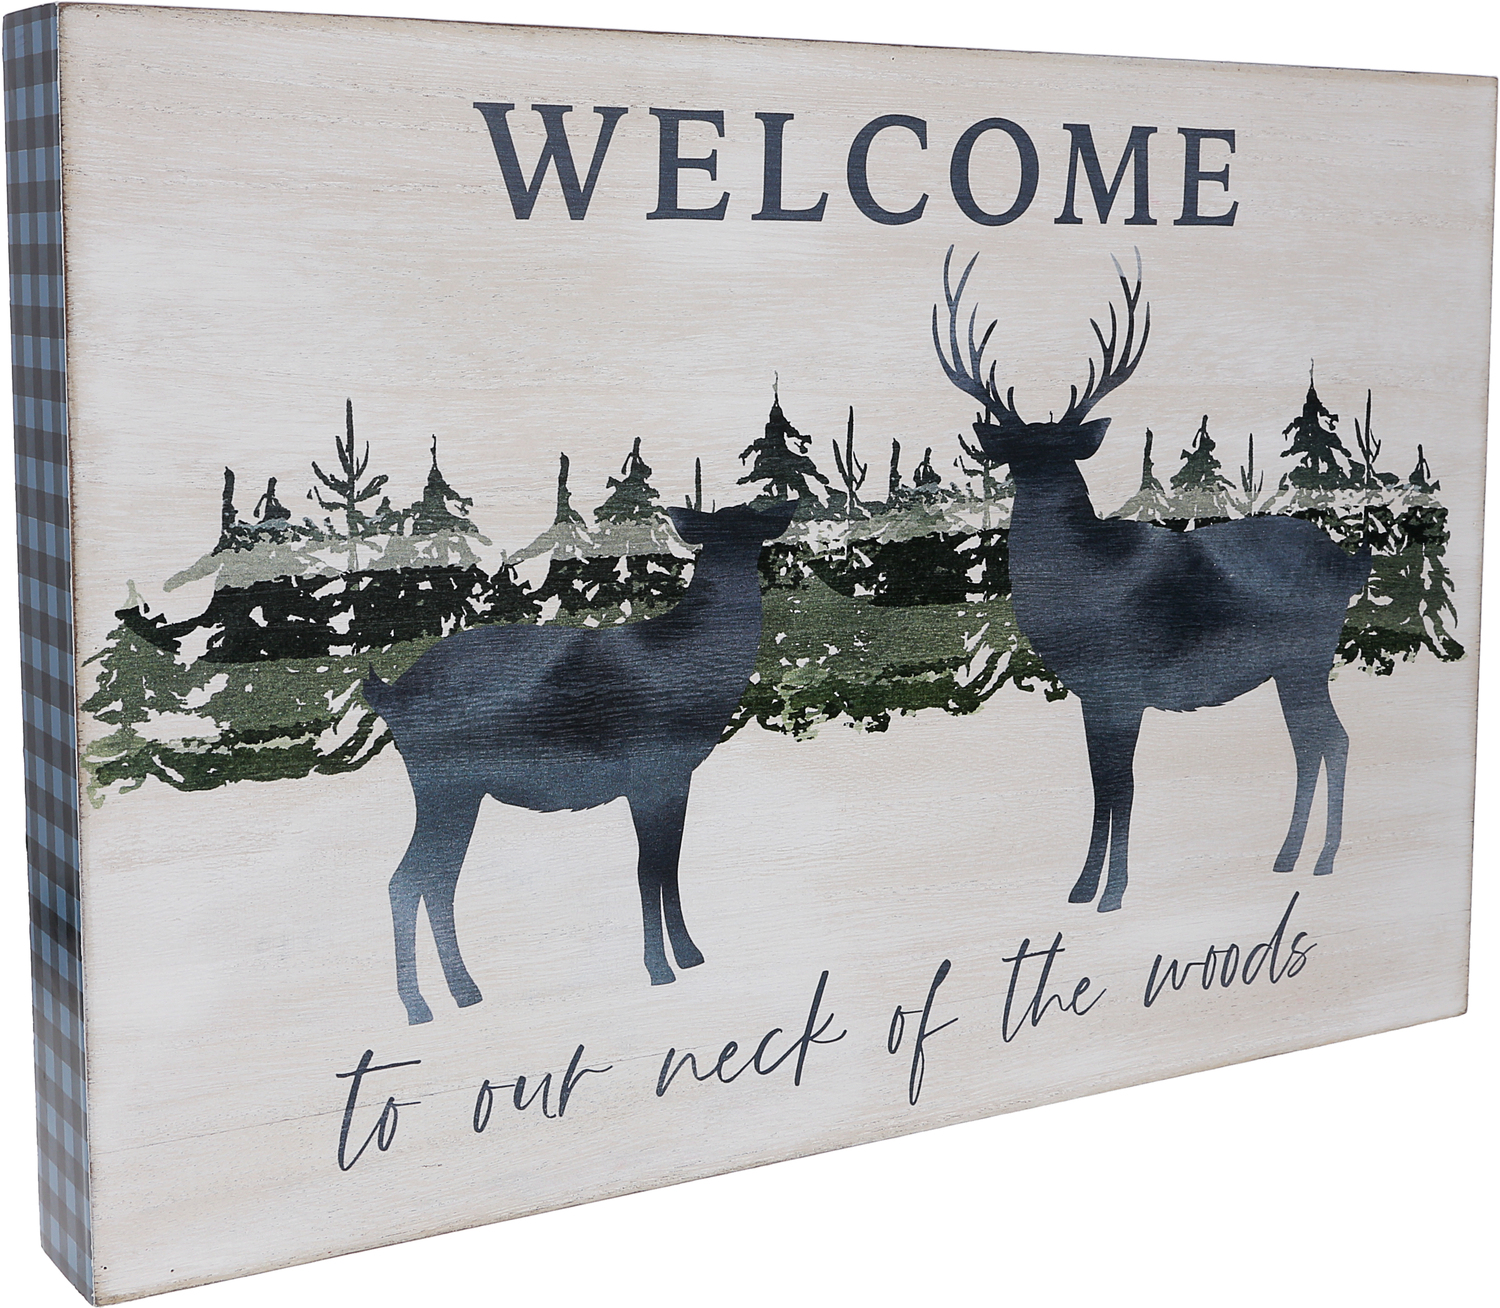 Welcome by Wild Woods Lodge - Welcome - 15" x 10" MDF Plaque